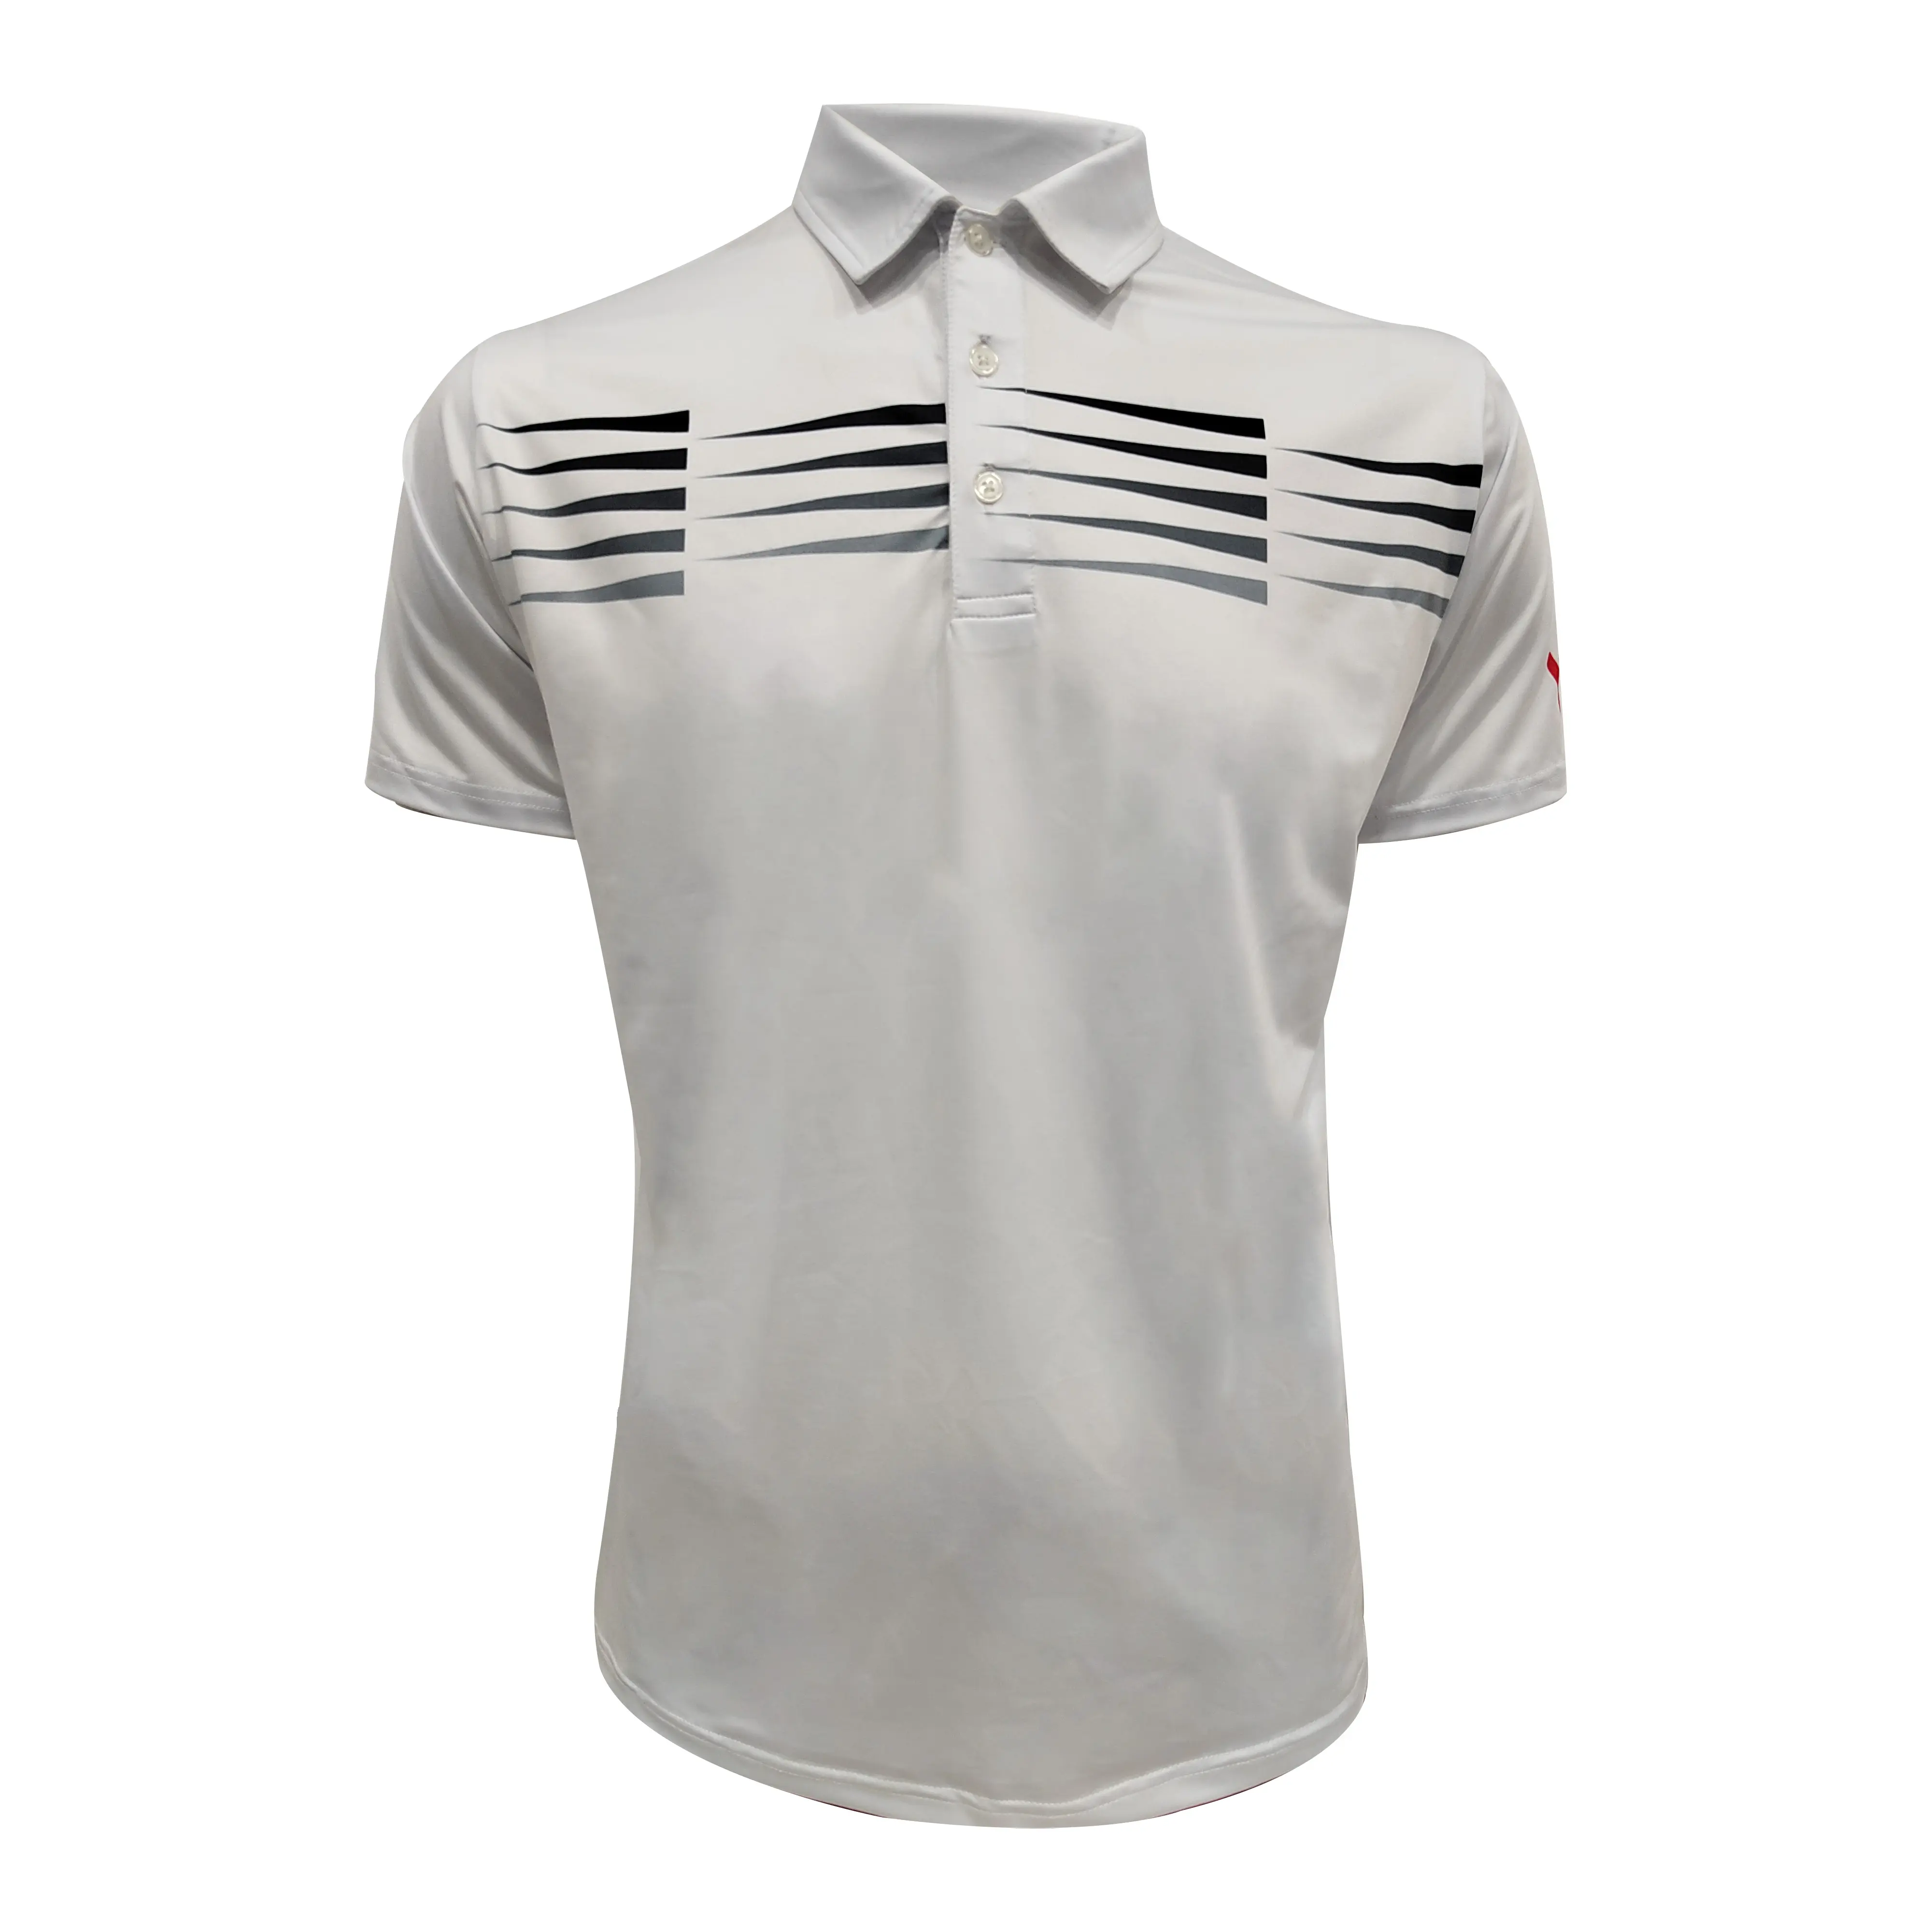 High quality polyester spandex custom performance cool dry golf polo shirt for men